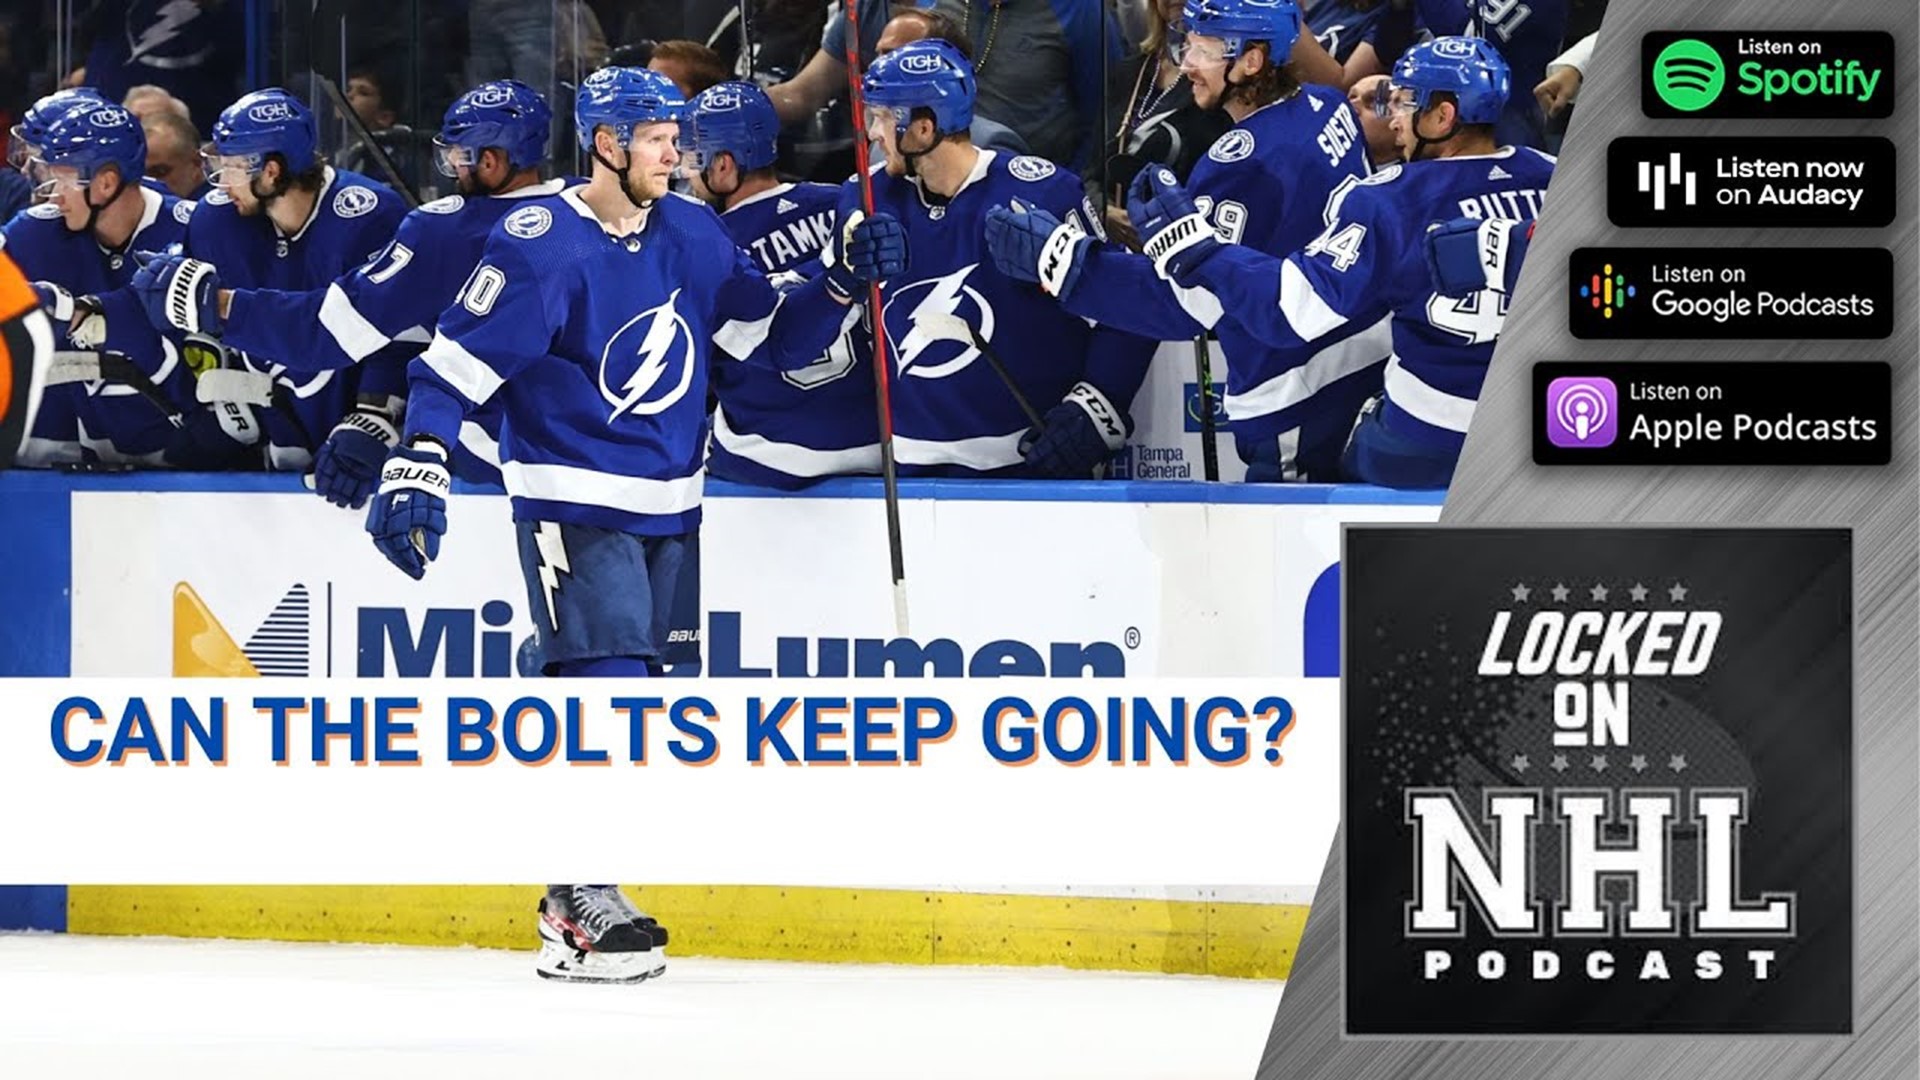 The Lightning Are In a Dogfight with the Leafs In Round 1